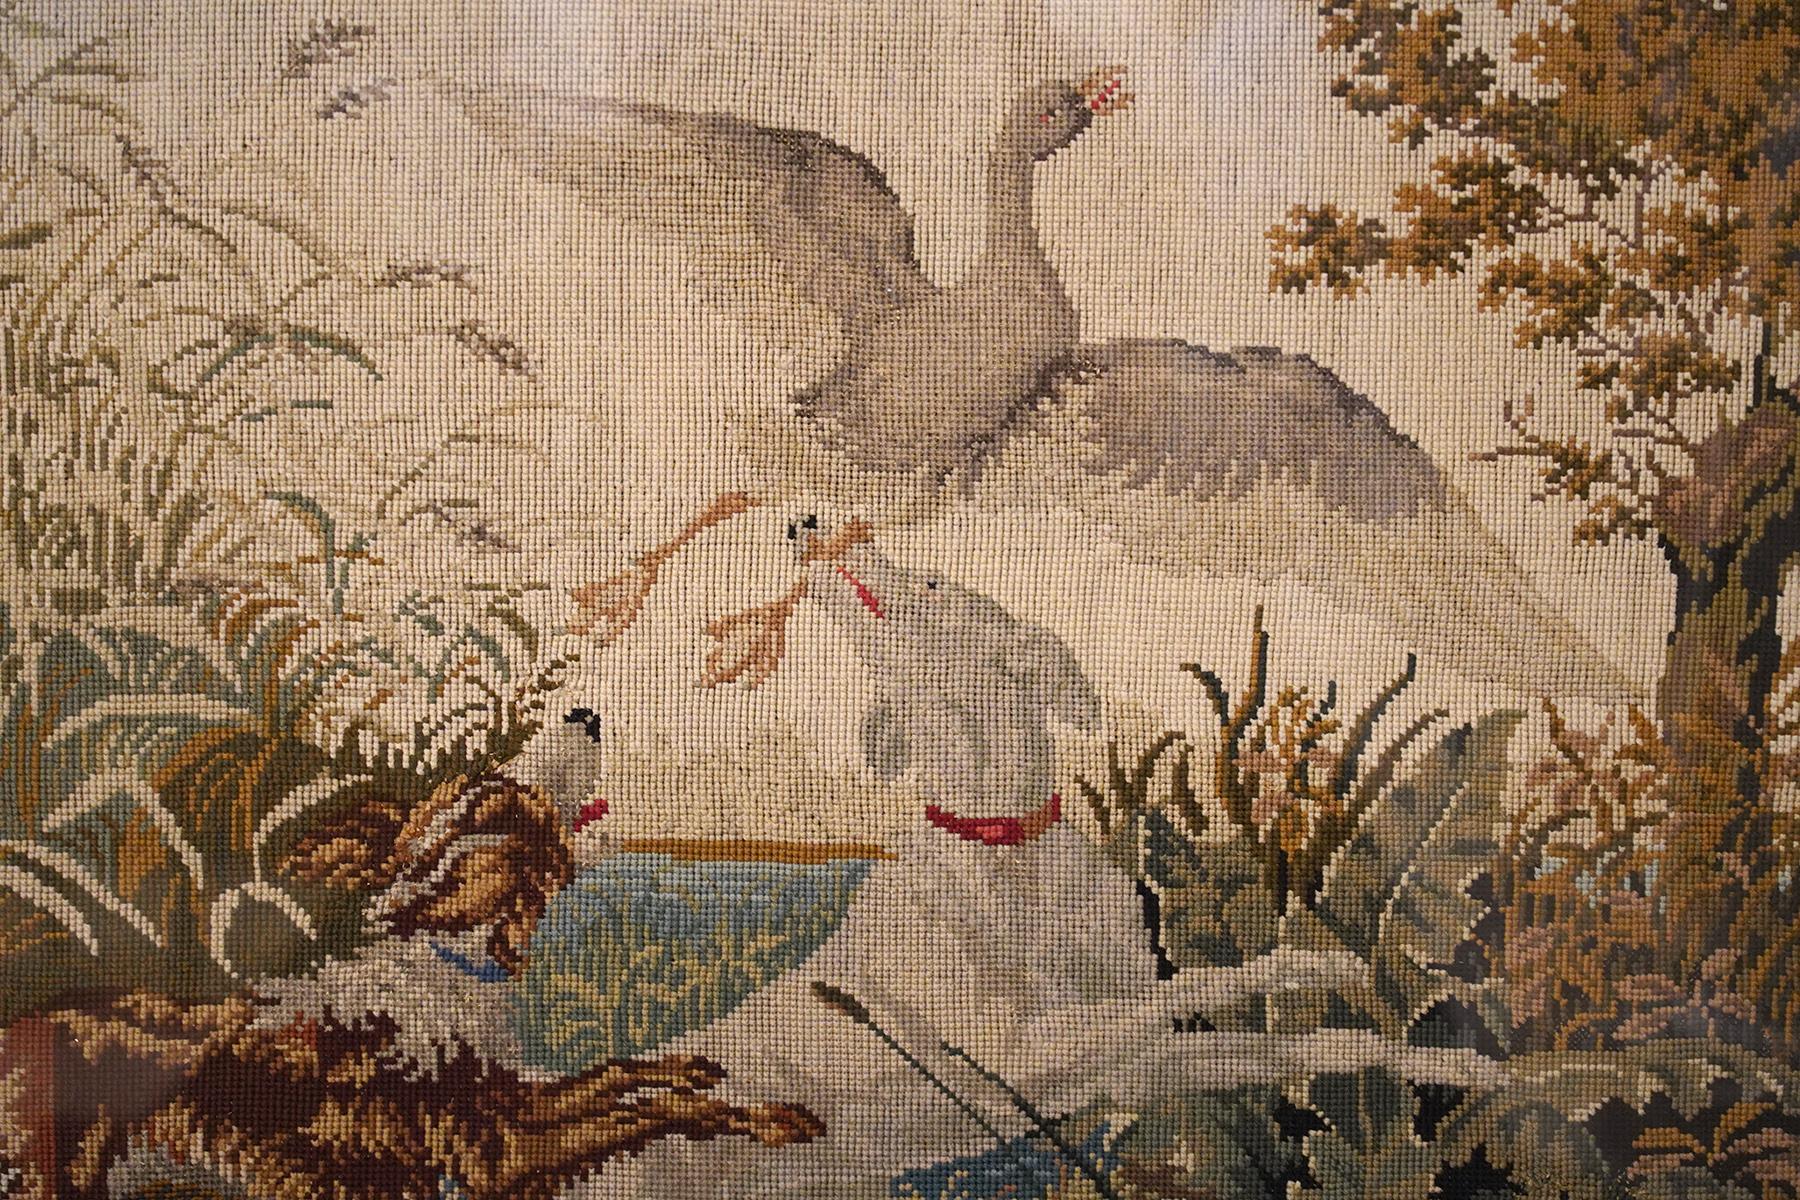 This rare English needlepoint is signed with initials and year 1840 in the lower left corner. It depicts two dogs and a flying duck in a lake landscape and the entire needlepoint is shaped and bordered with leafwork and foliate scrolls. The